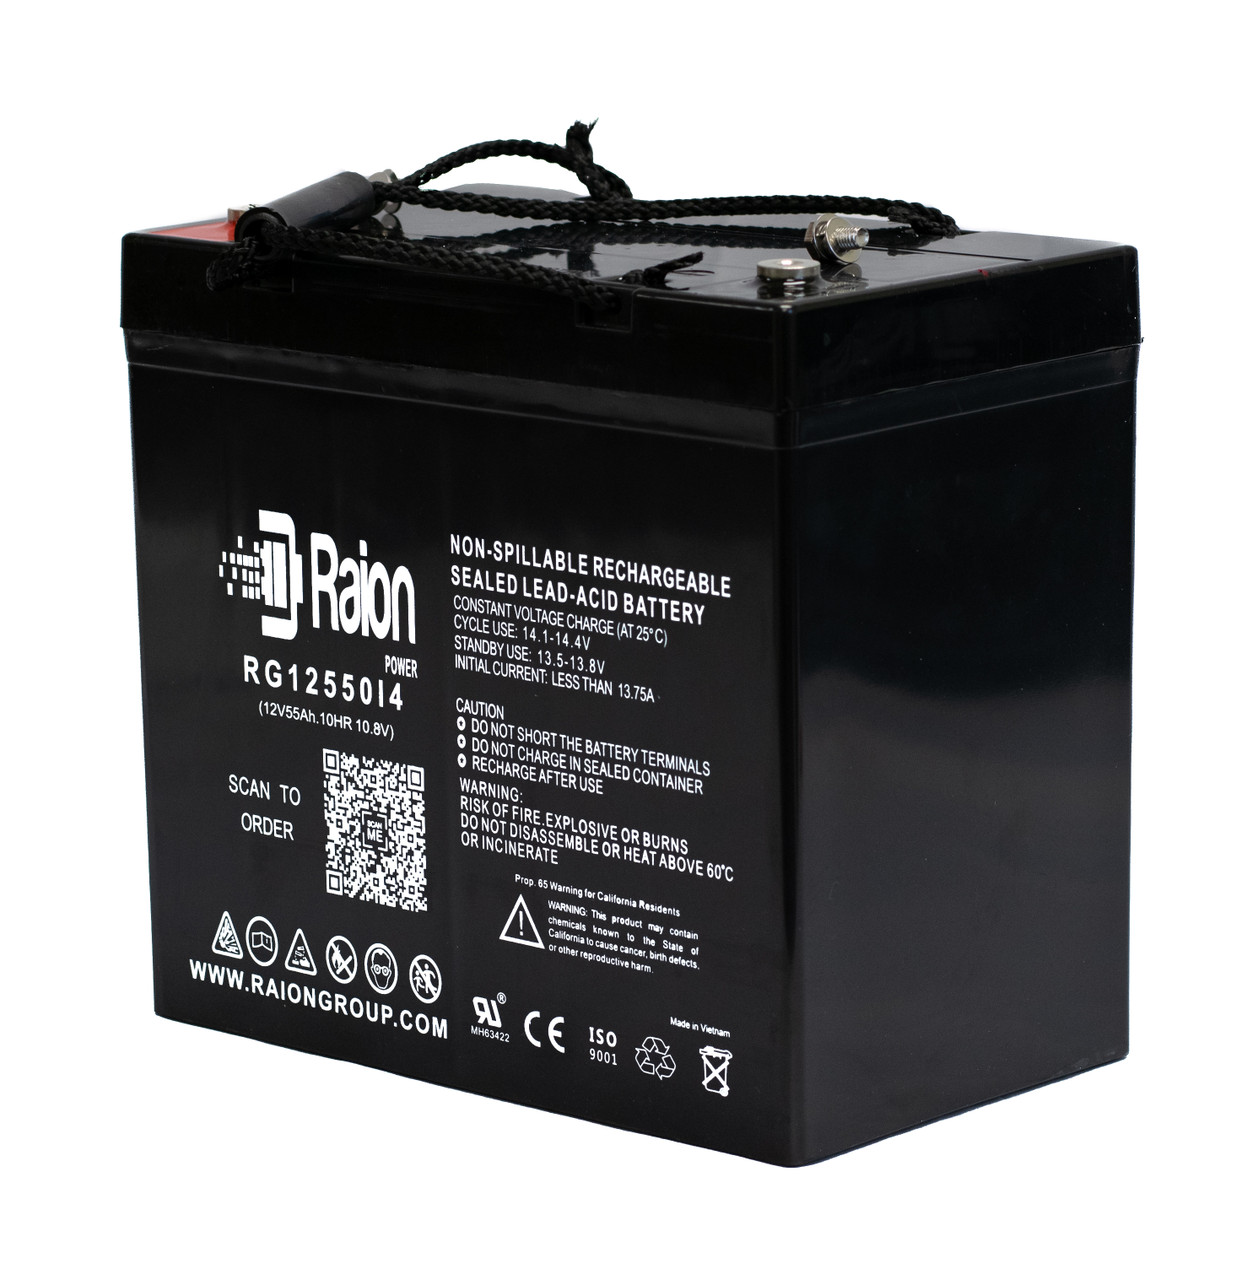 Raion Power 12V 55Ah 22NF Mobility Scooter Battery Replacement for Quickie V-100 Rear Wheel Drive